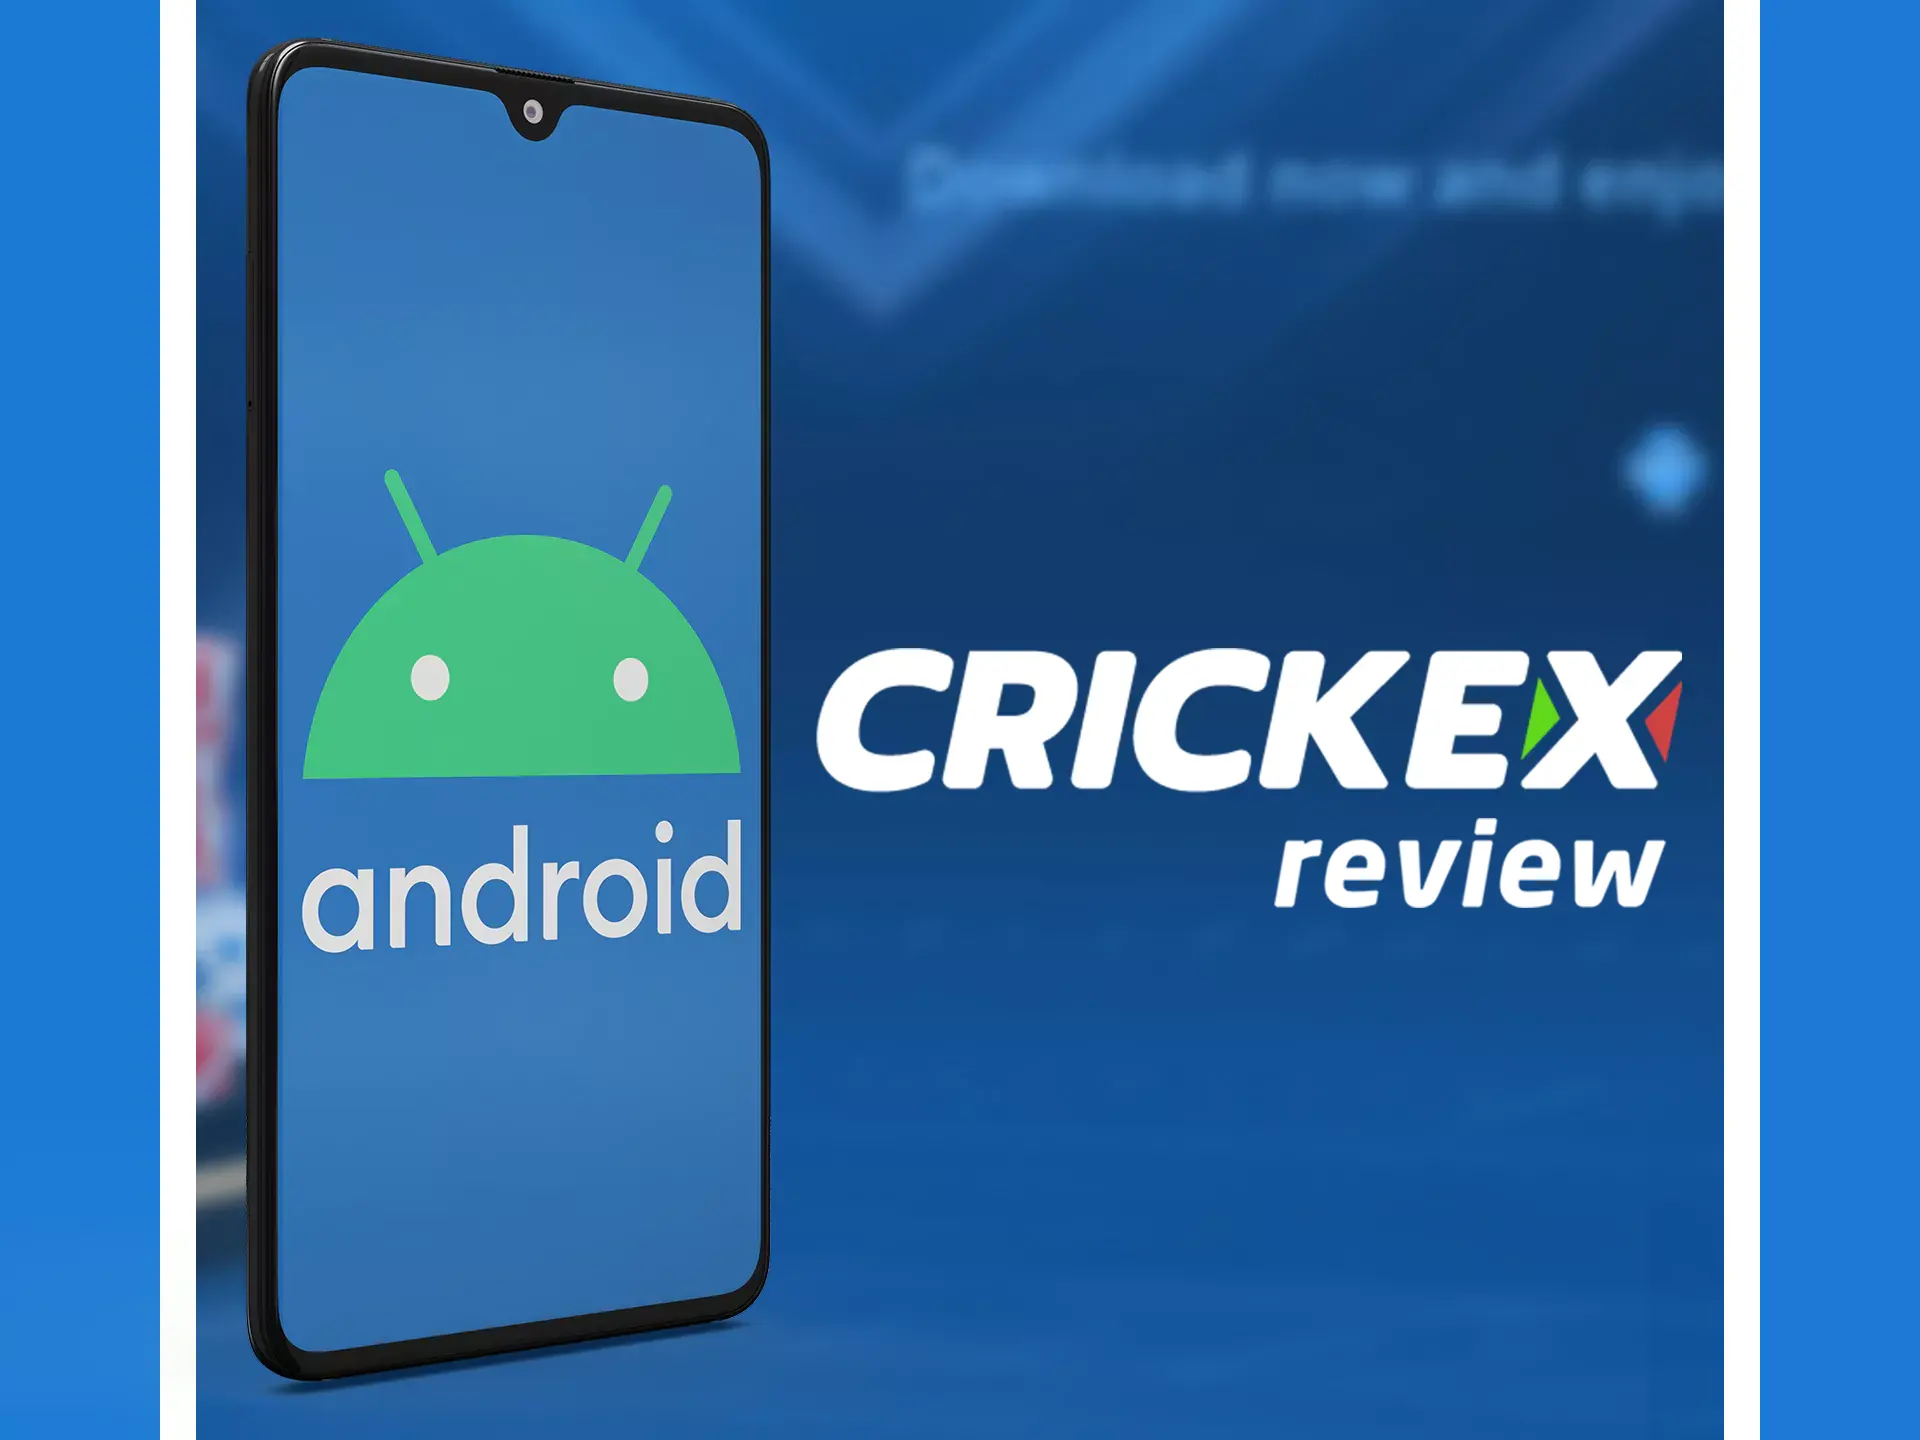 The Crickex app is stable on Android devices.